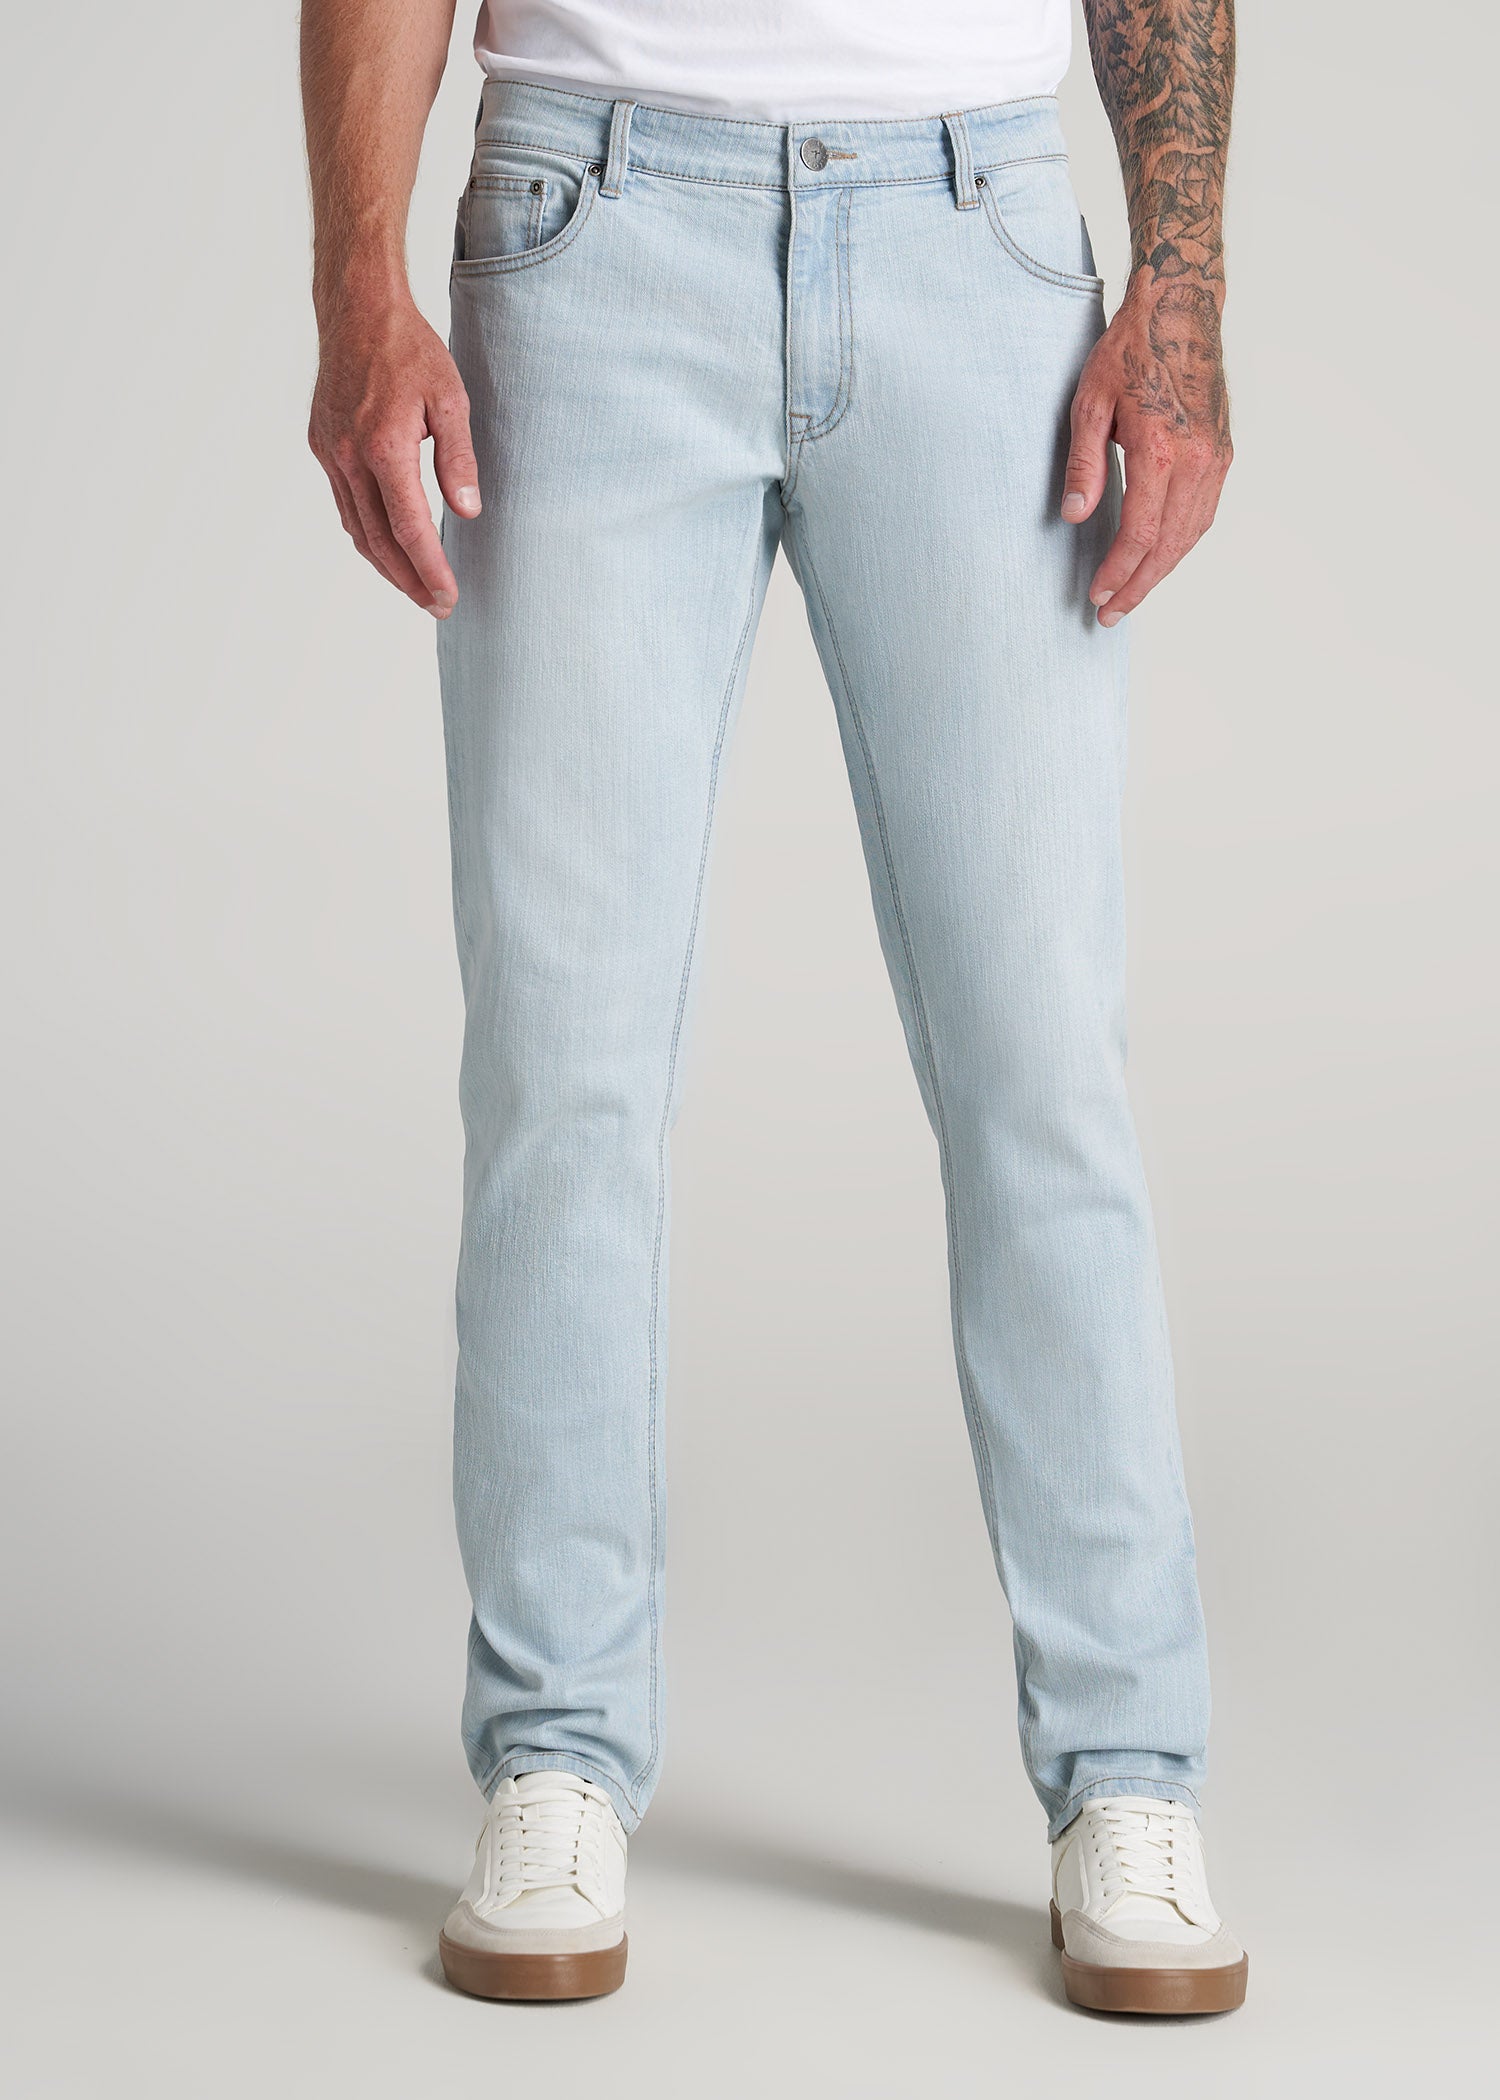 Jeans for Tall Men American Tall